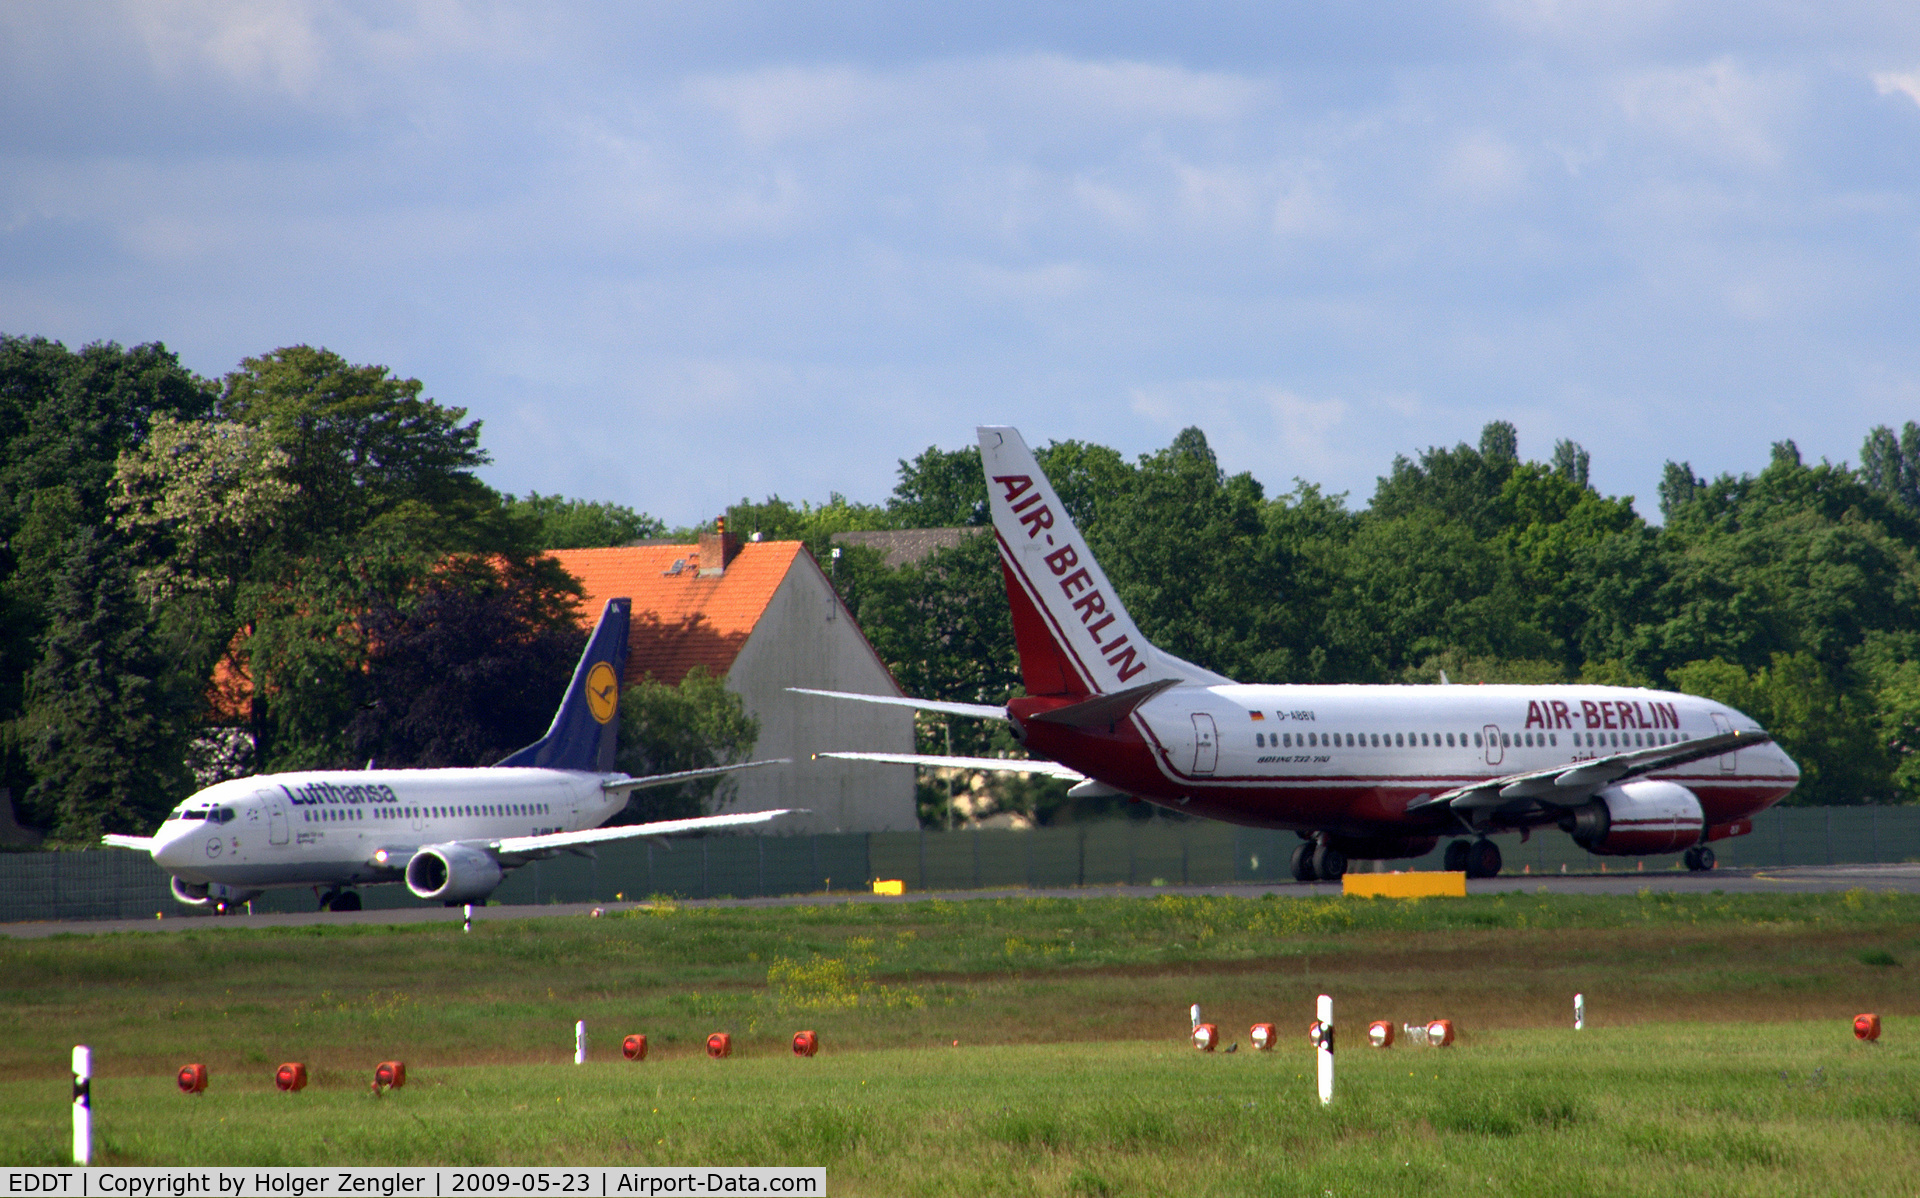 Tegel International Airport (closing in 2011), Berlin Germany (EDDT) - Saturday morning at the end of the runway